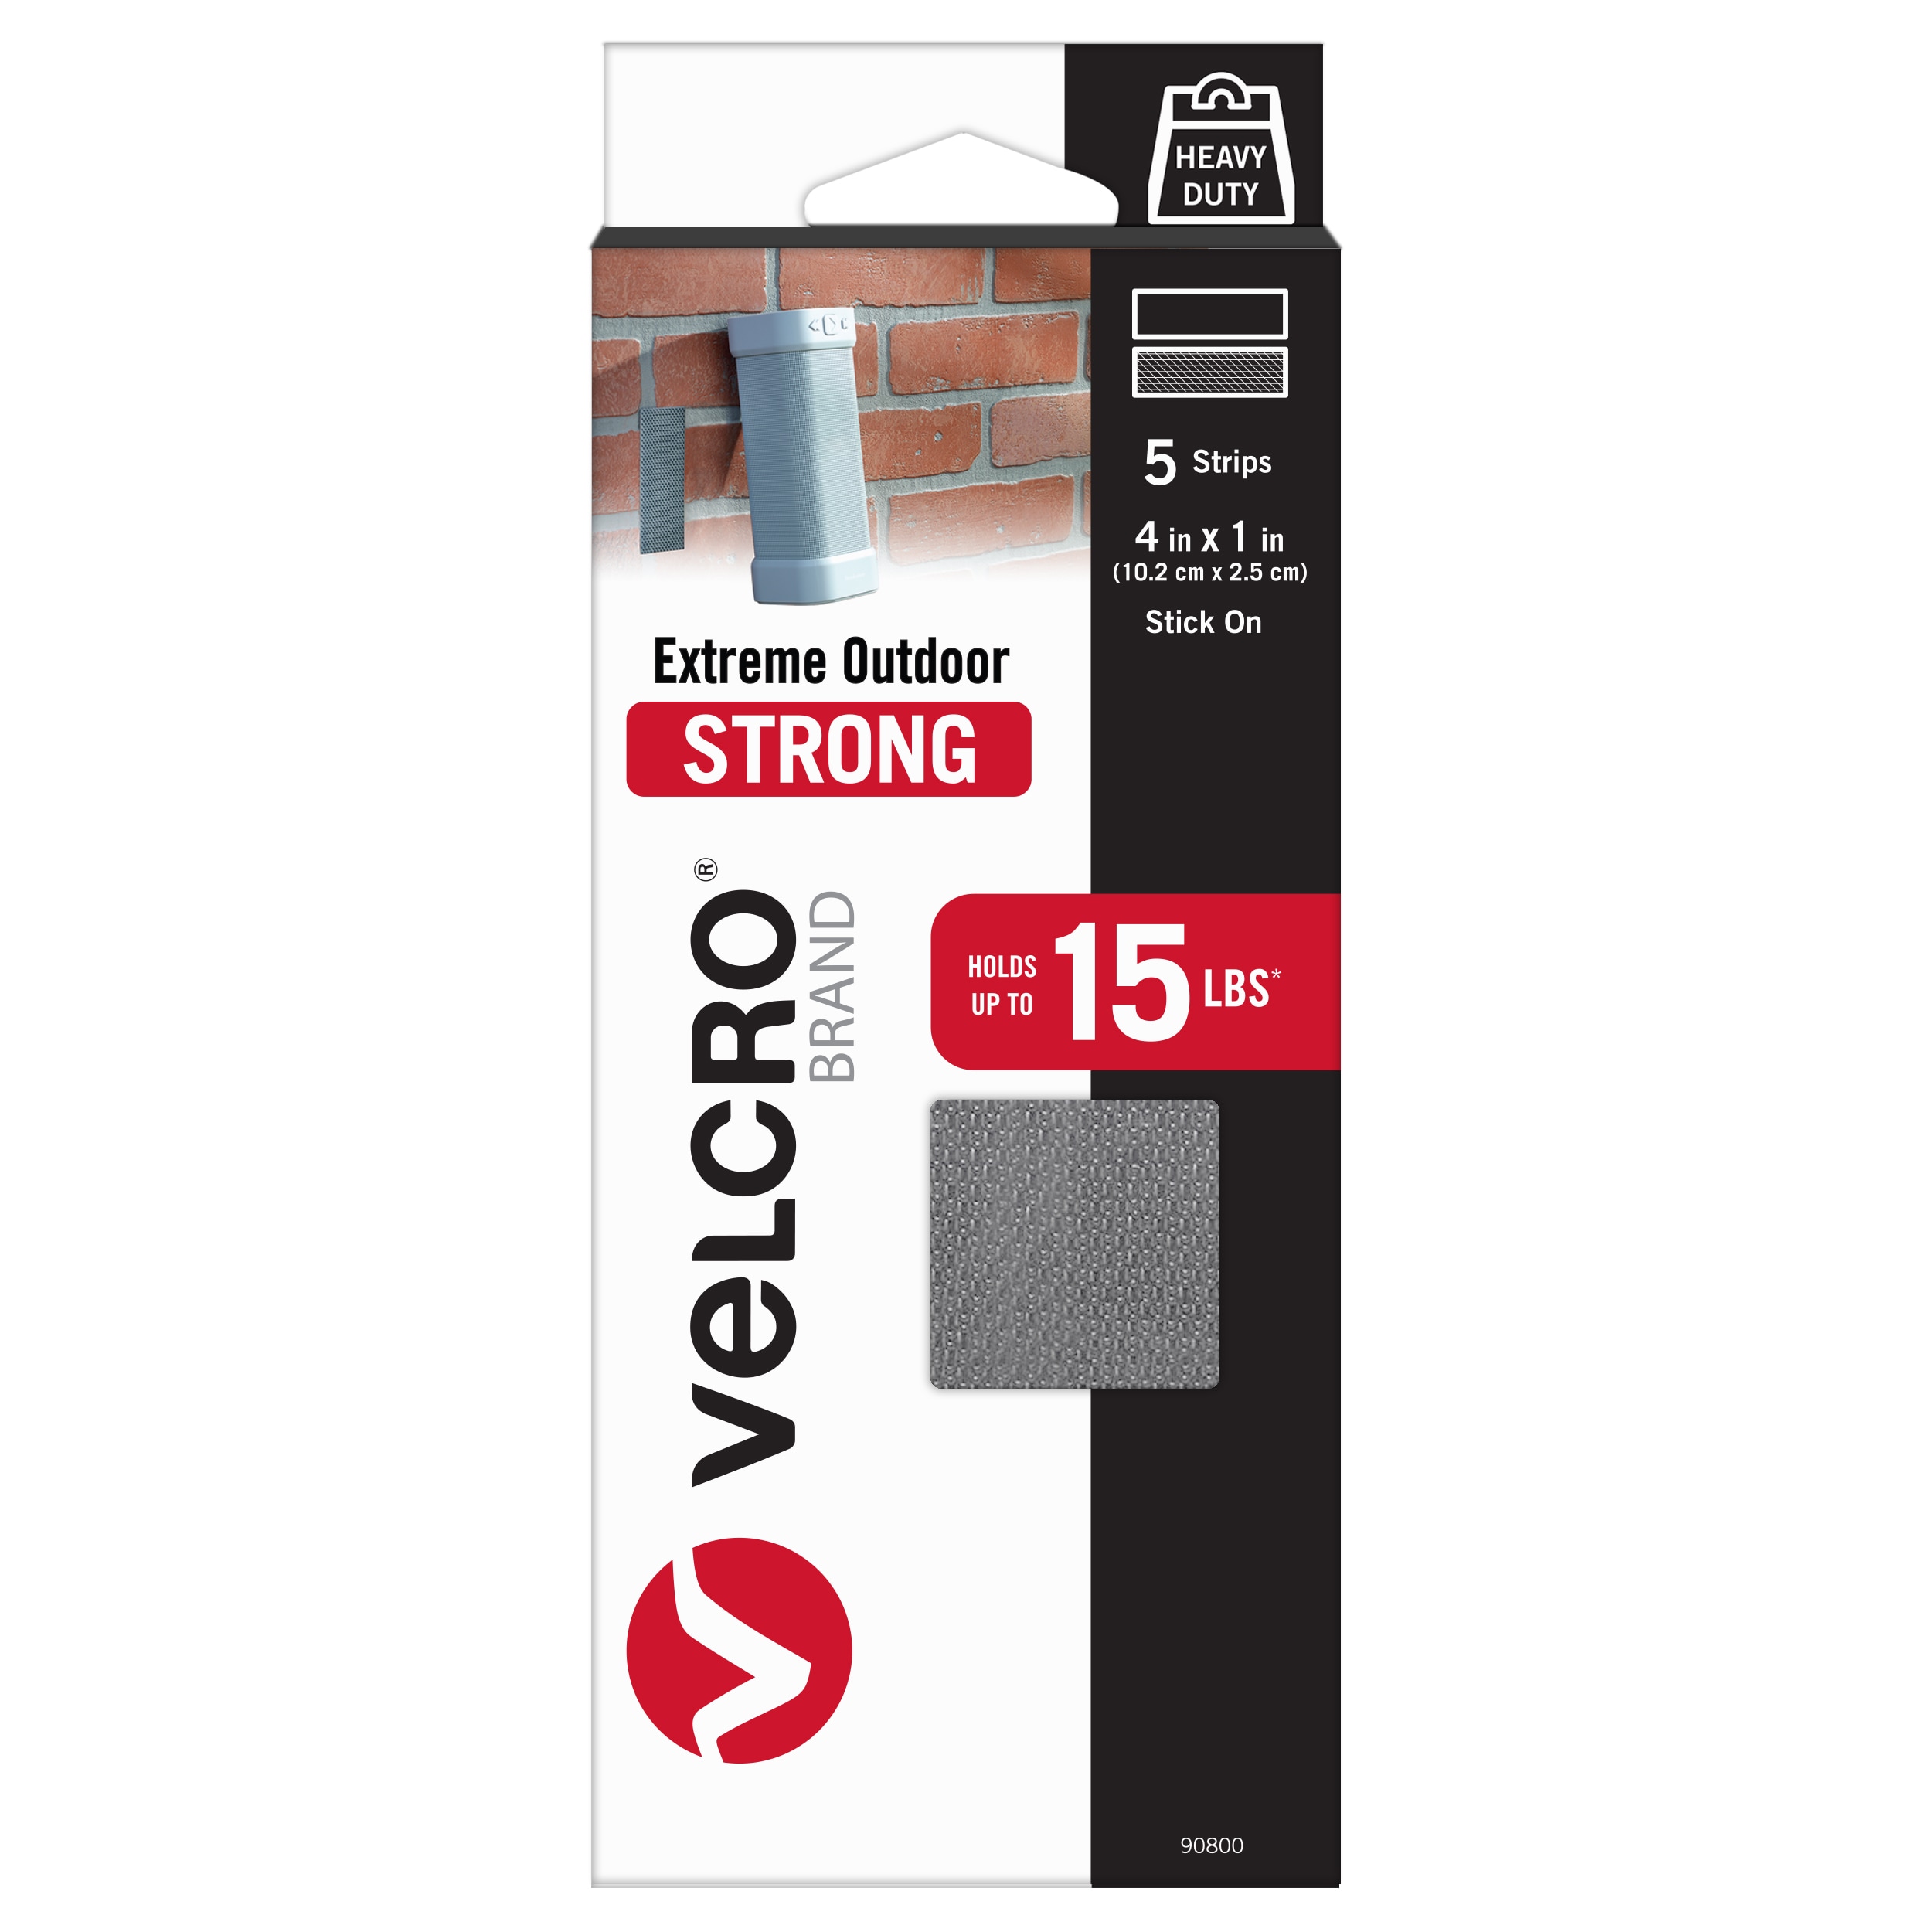 VELCRO Brand Specialty Fasteners & Fastener Kits at